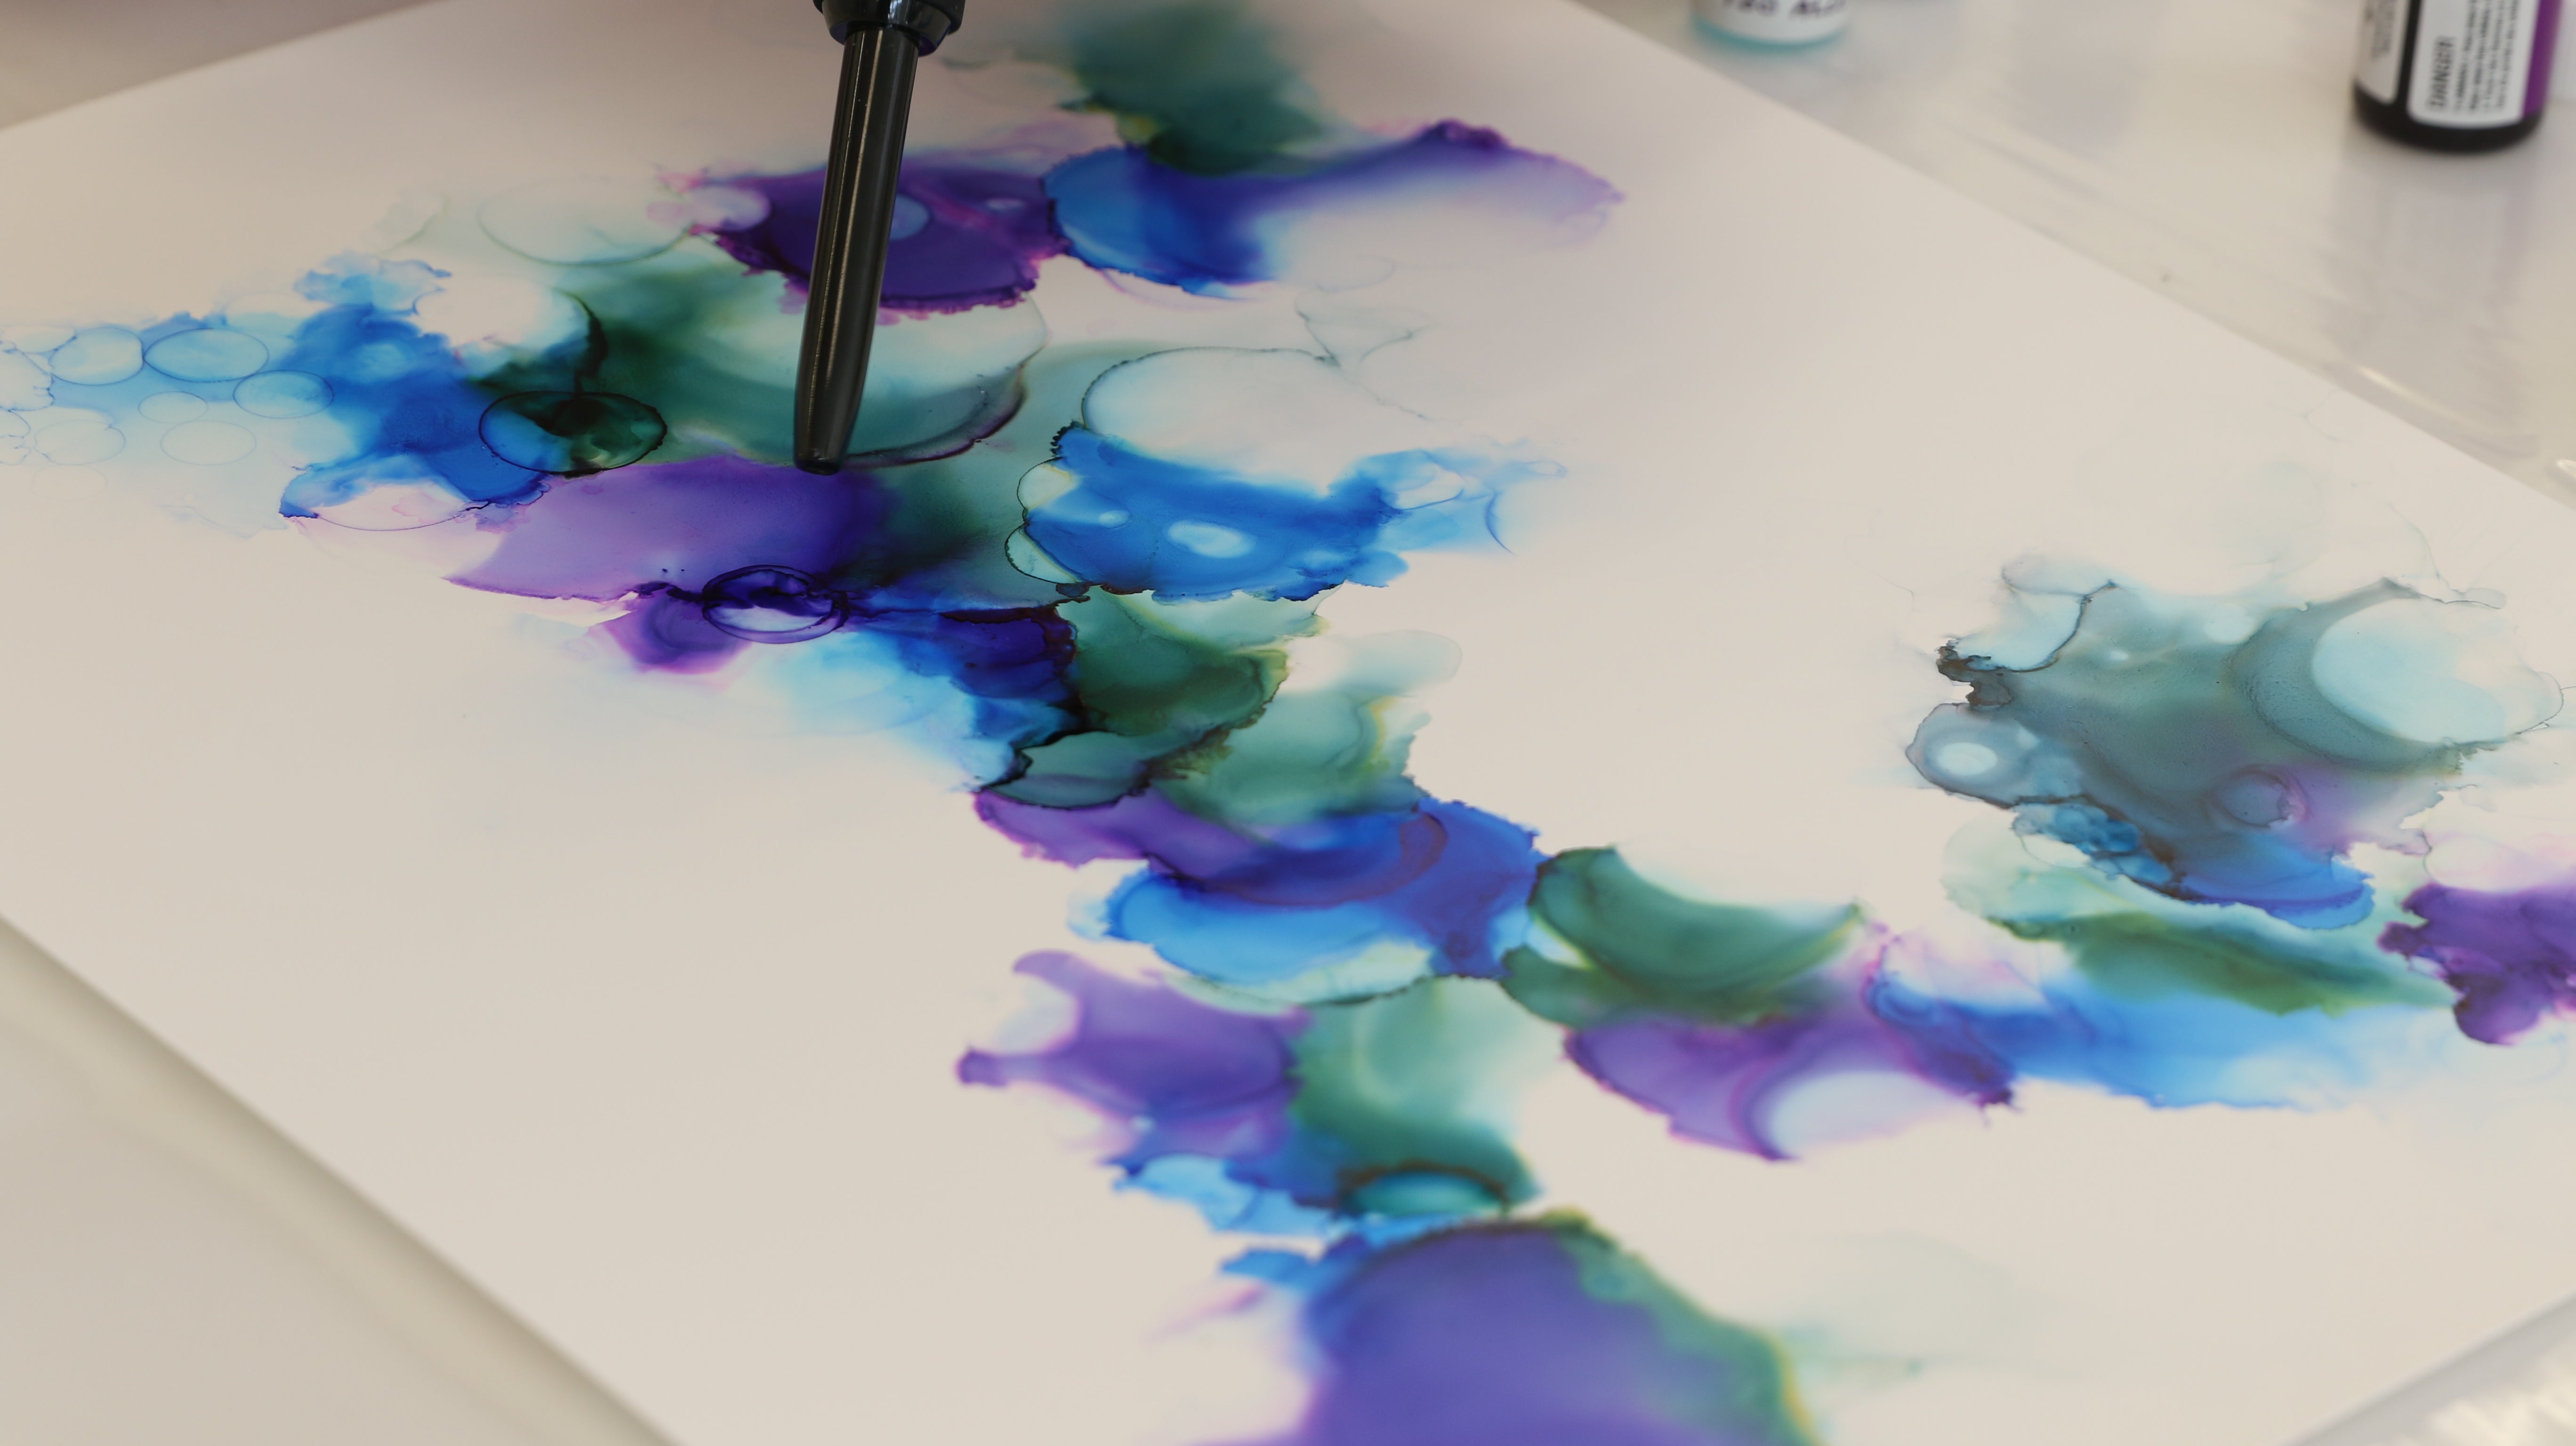 How To Paint With Alcohol Ink On Yupo Paper?